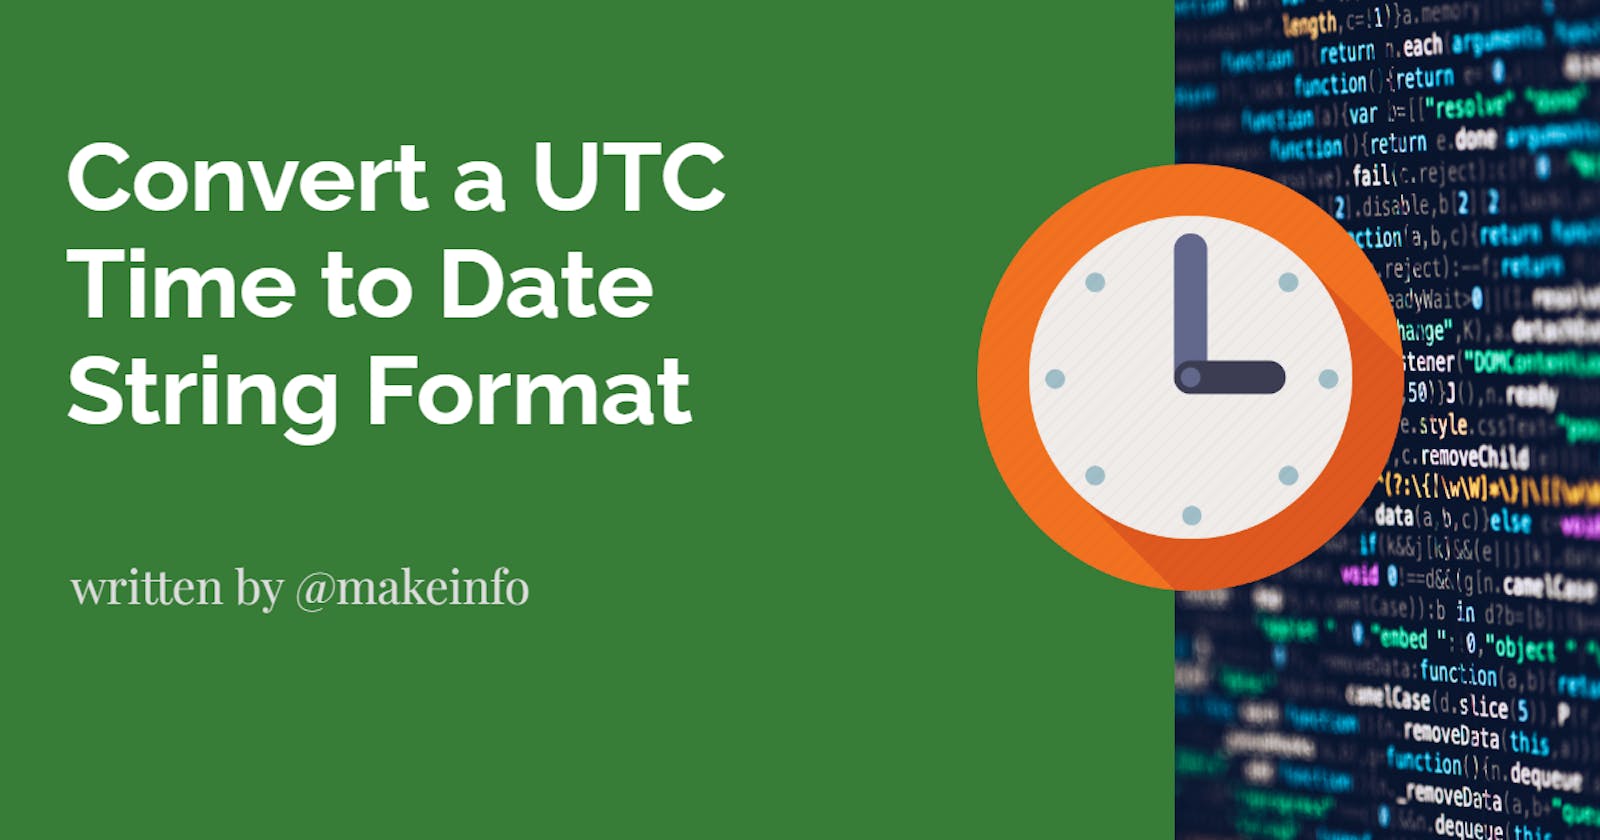 How to Convert a UTC Time to Date String Format in Javascript